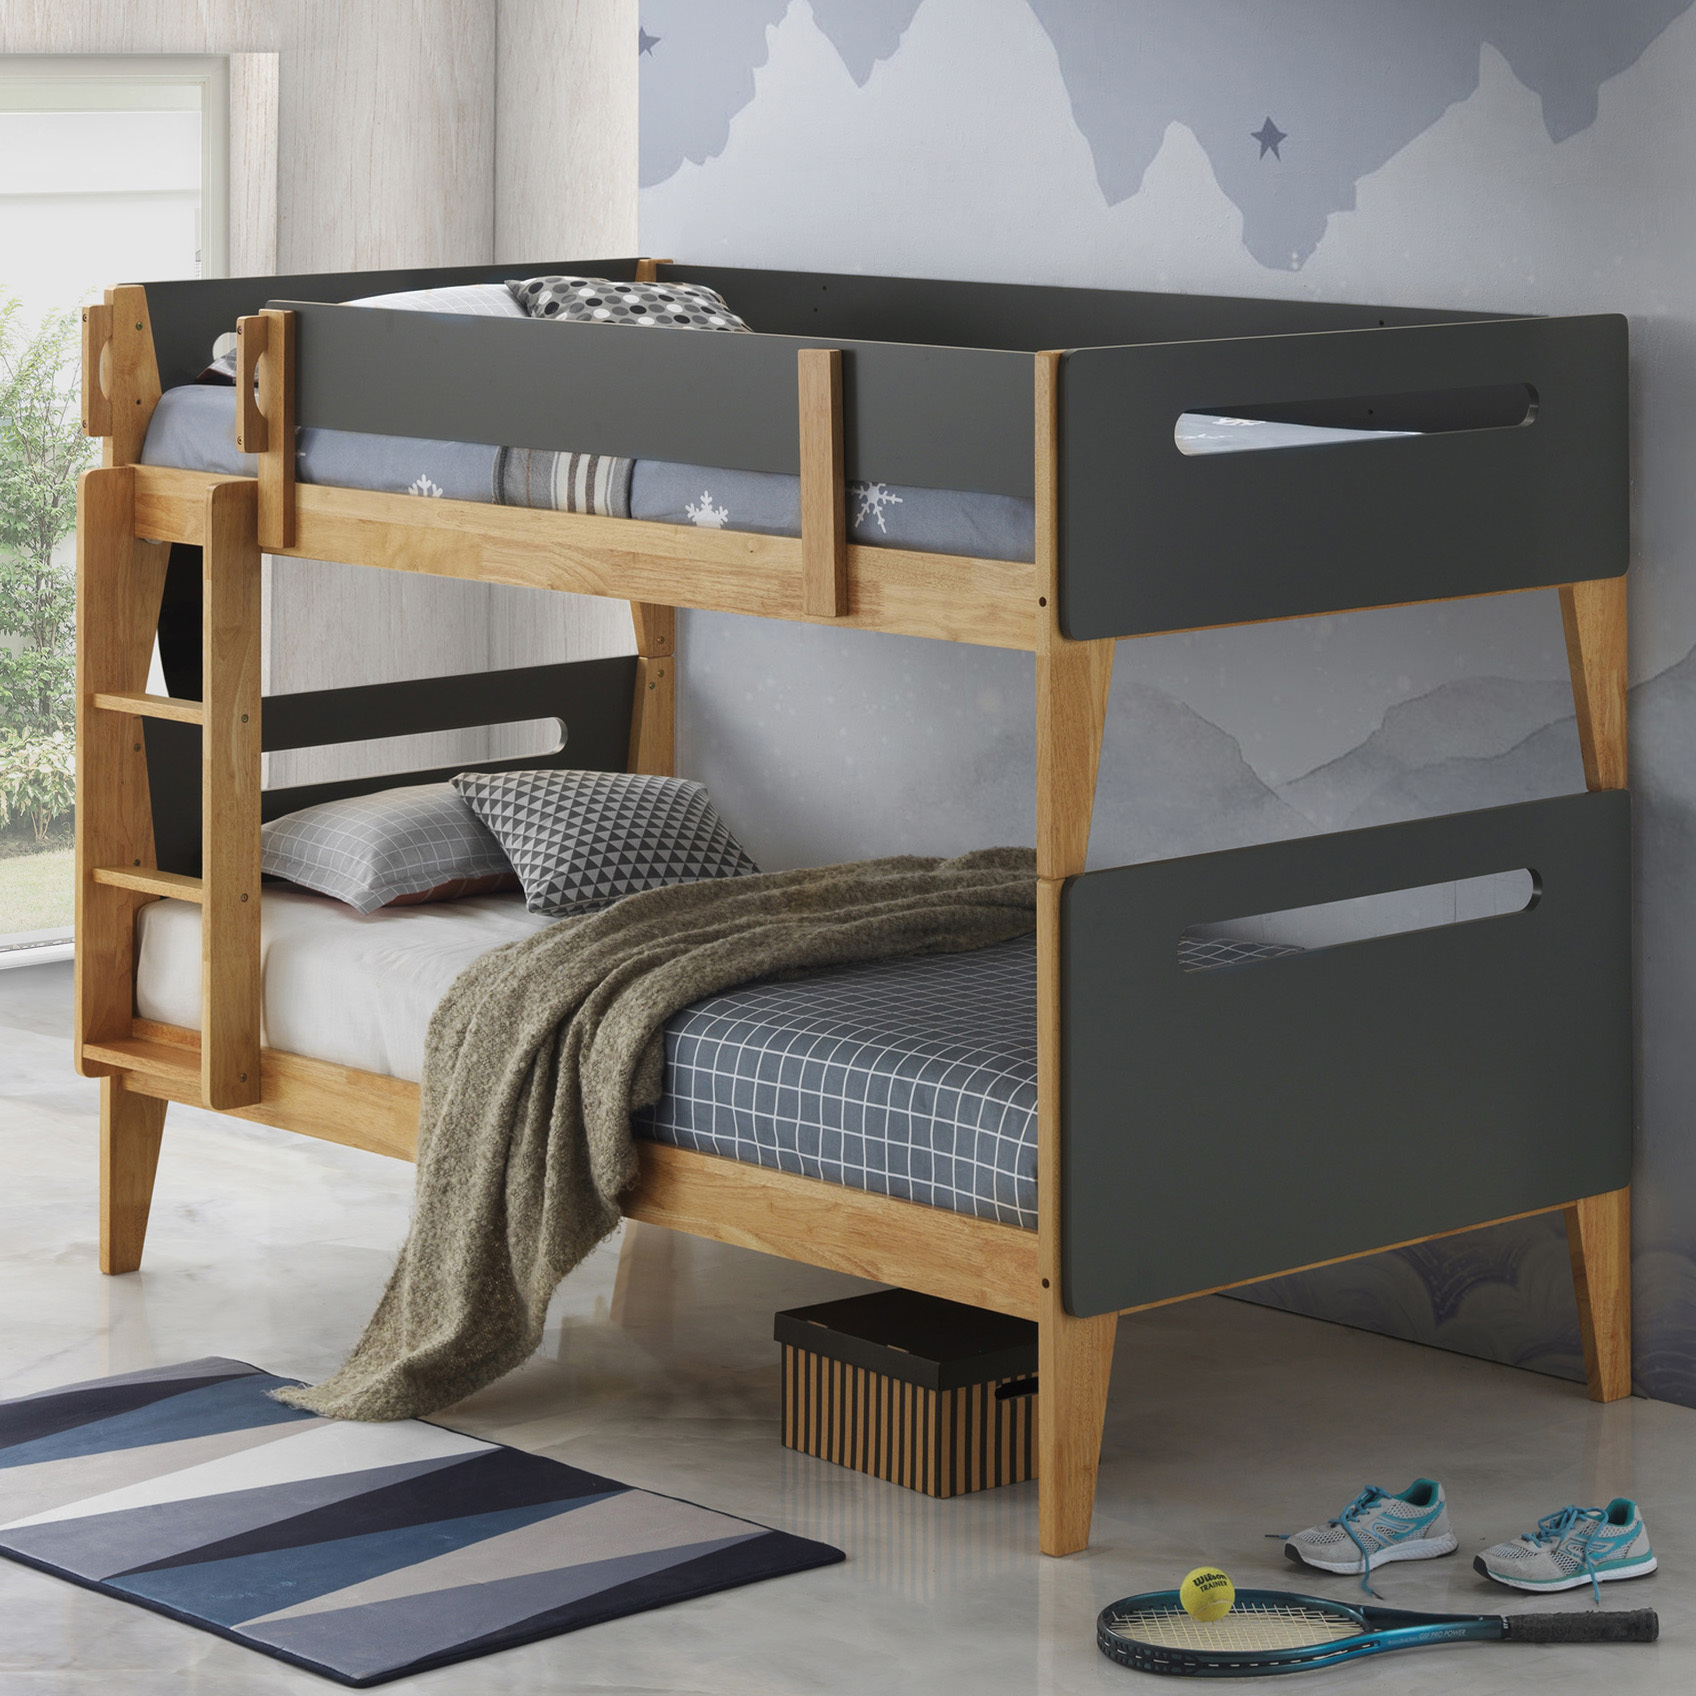 Charcoal Casla Bunk Bed Temple Webster, Wooden Dowels For Bunk Beds